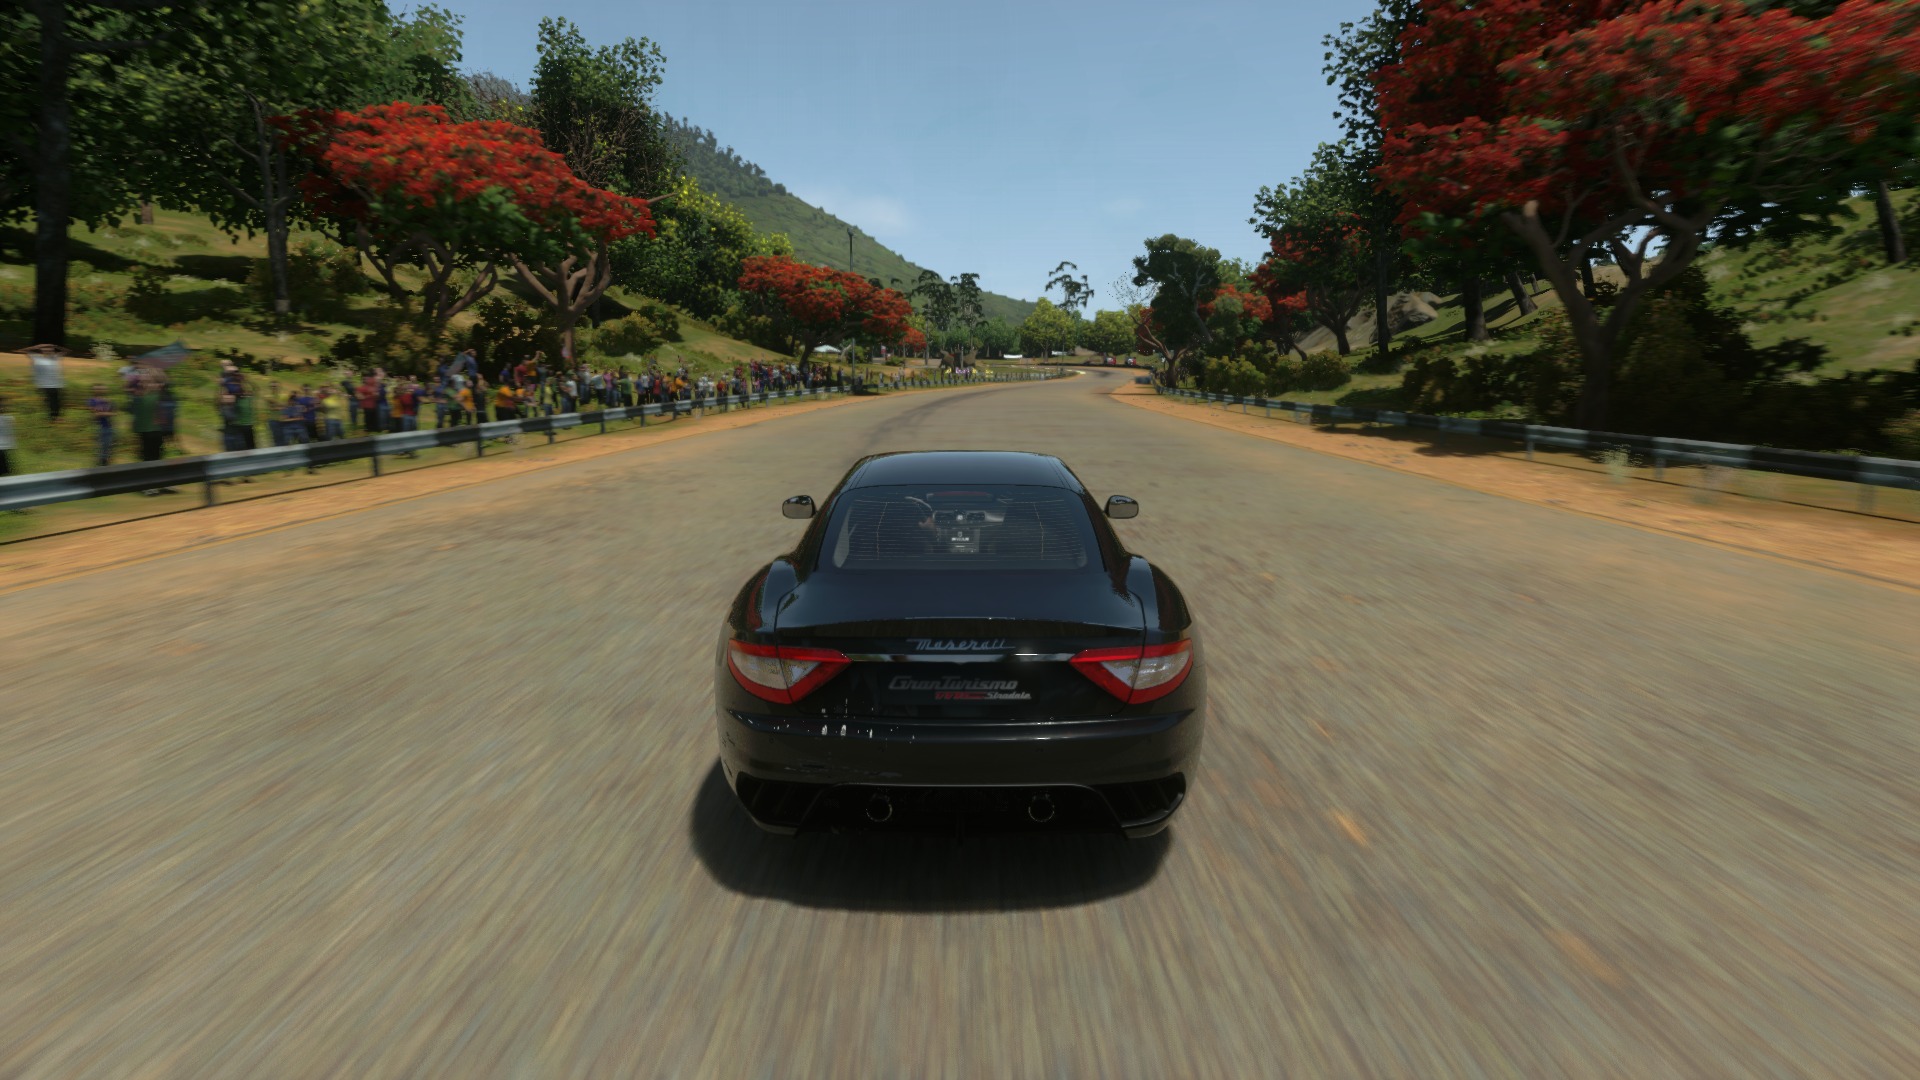 driveclub pc gameplay